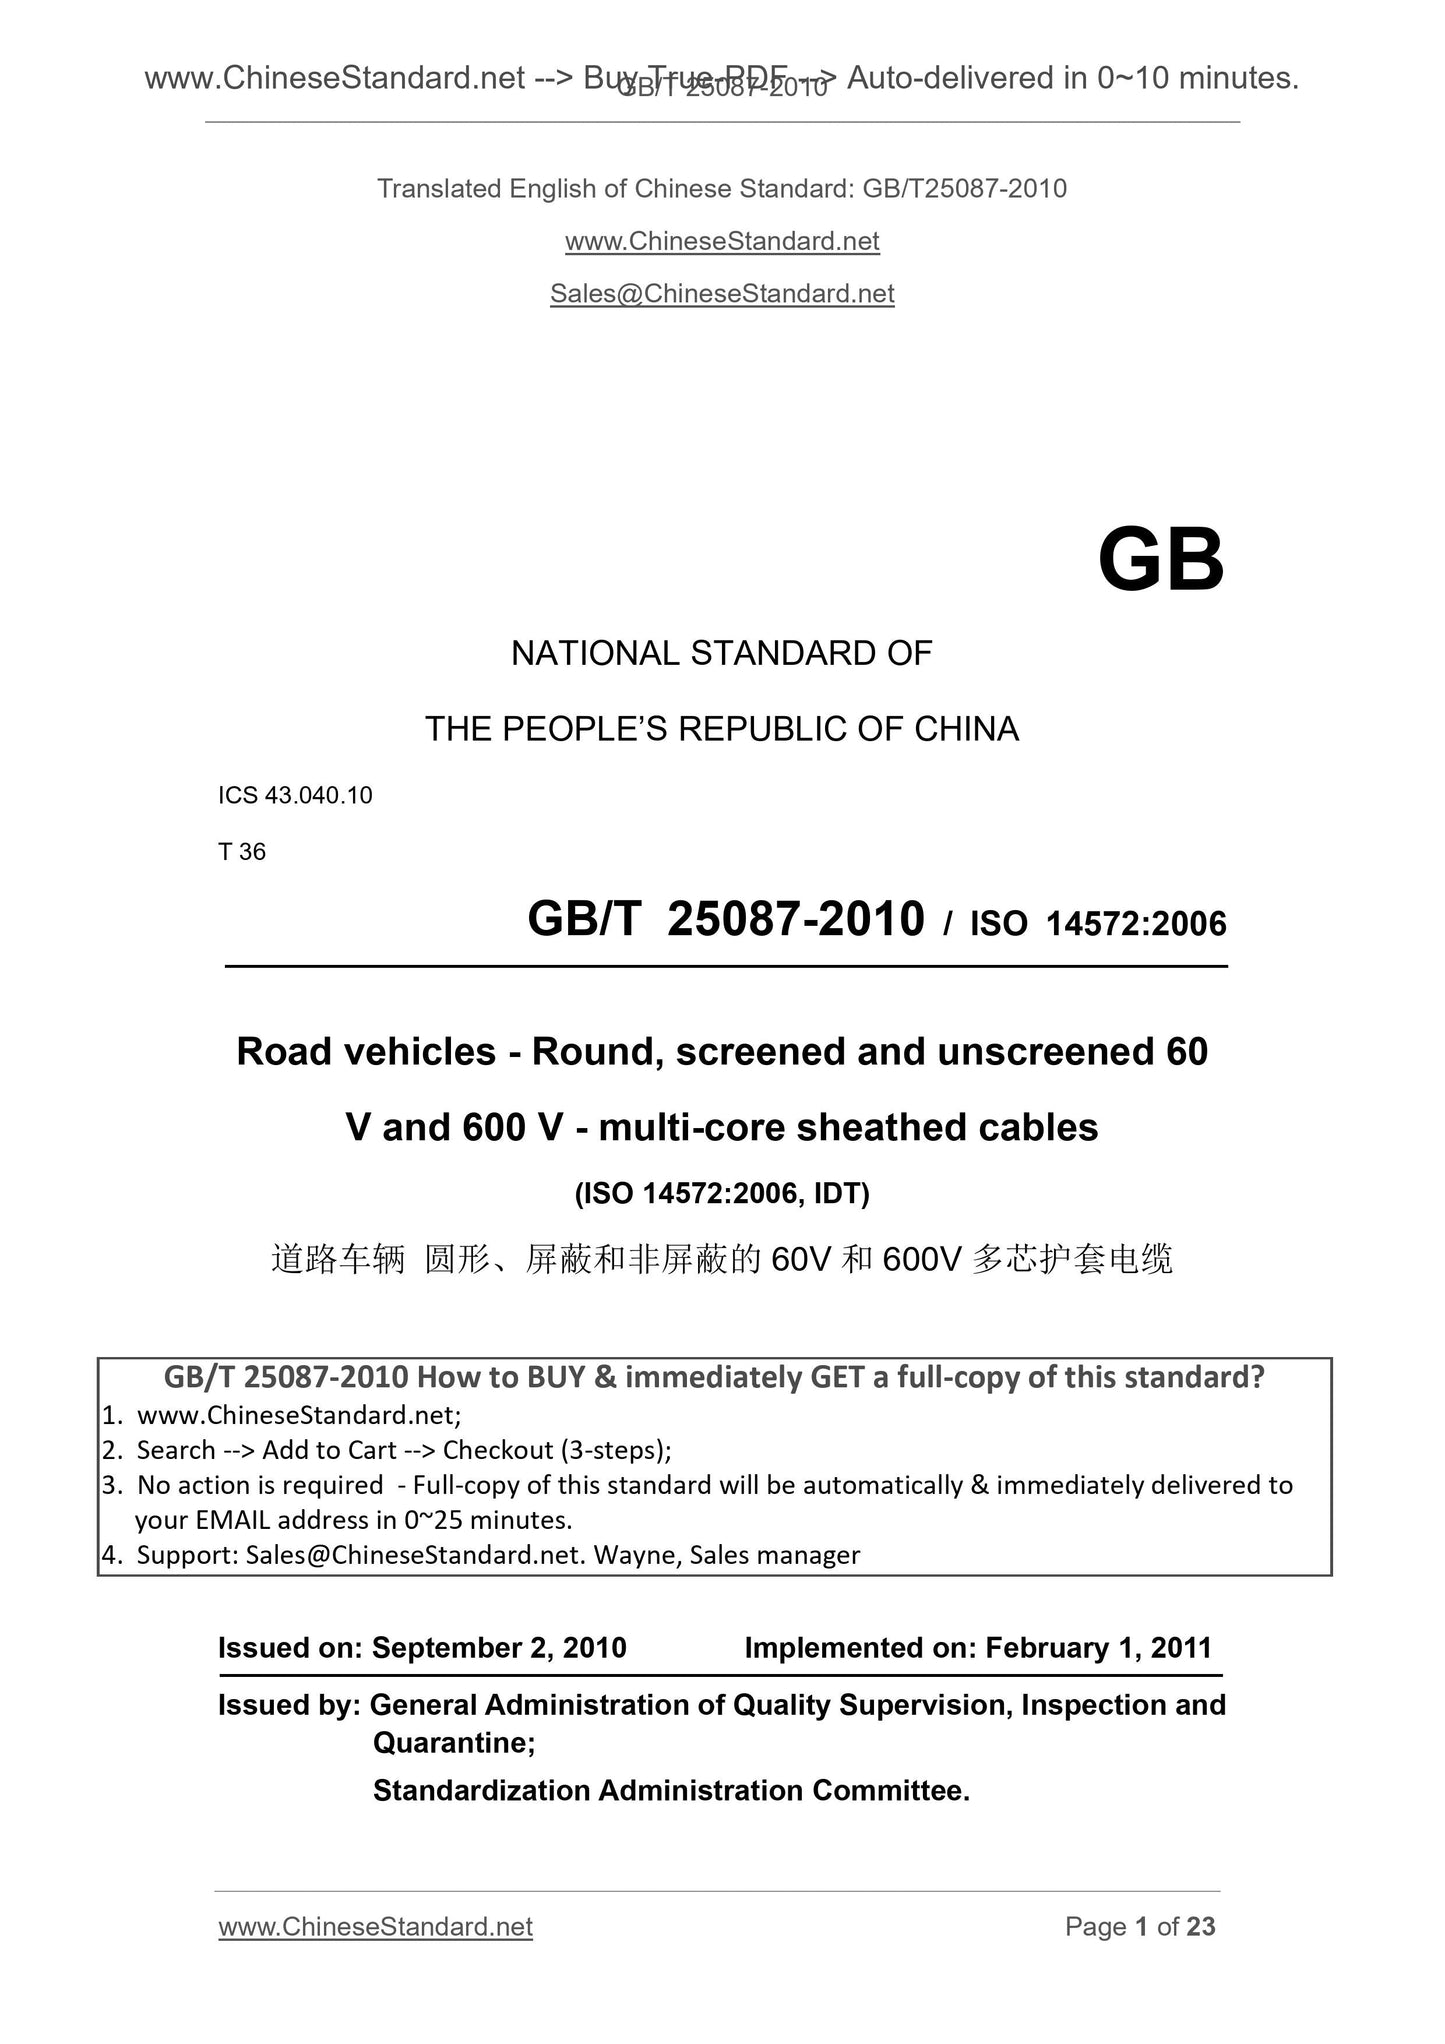 GB/T 25087-2010 Page 1